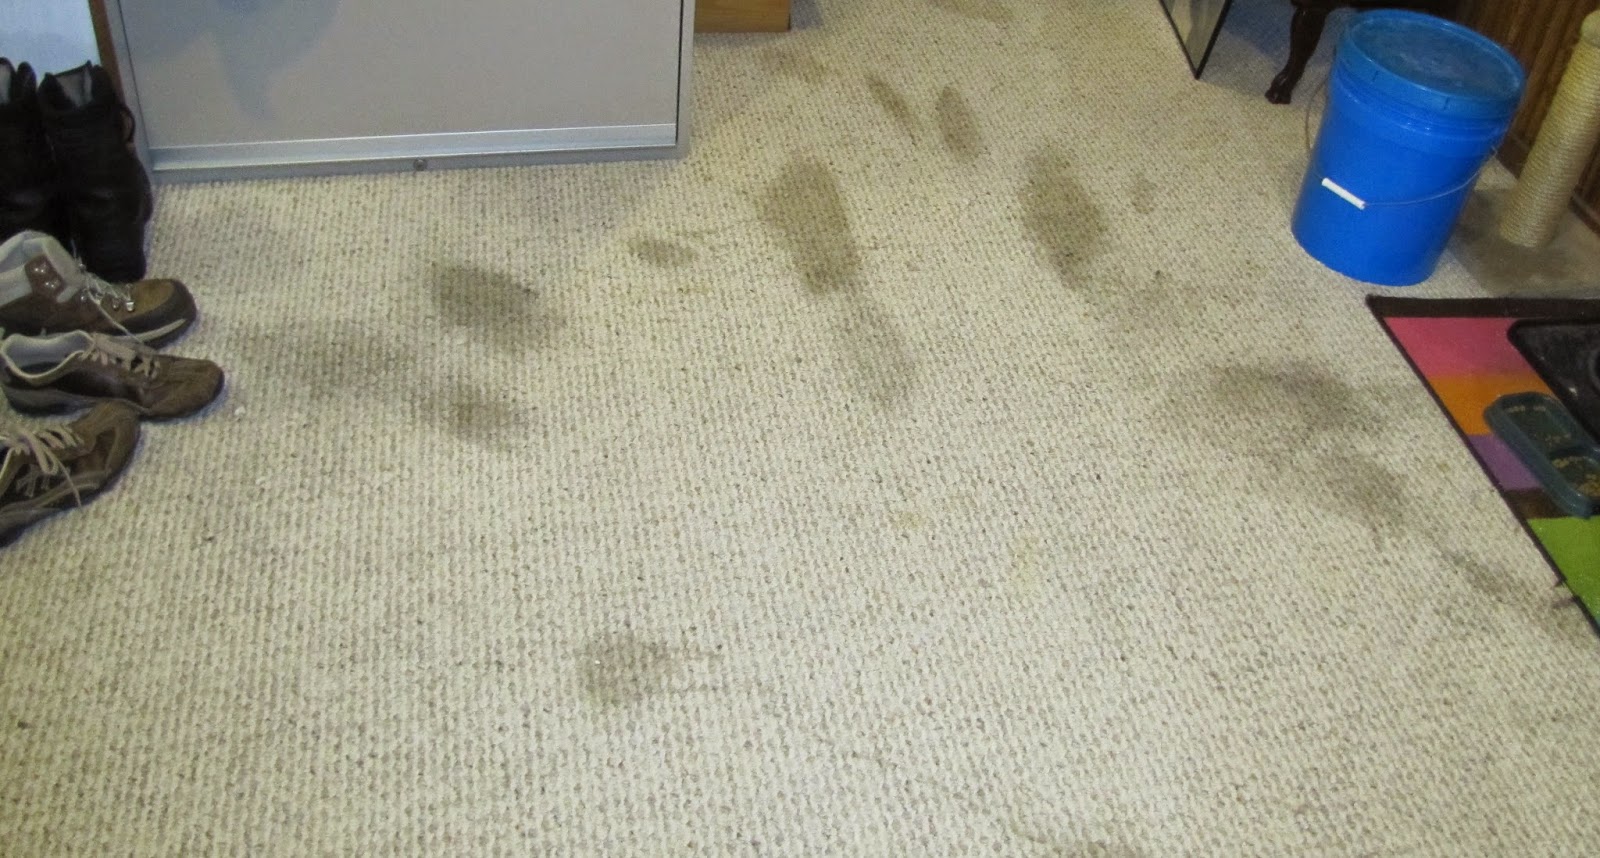 Clean pet stains from carpet